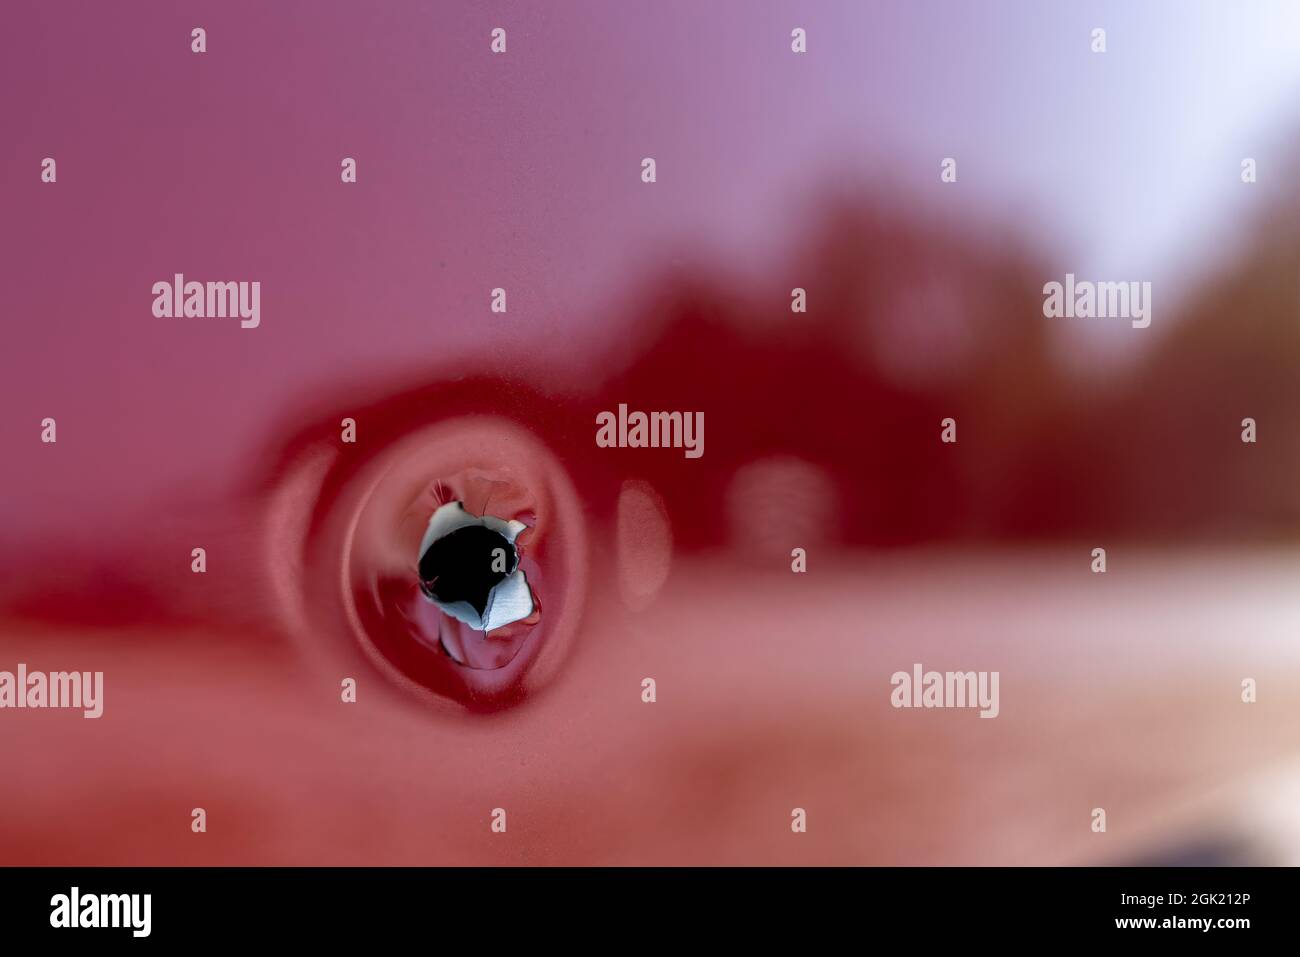 Close up shot of a bullet hole on within the passenger side door of a red car. Stock Photo